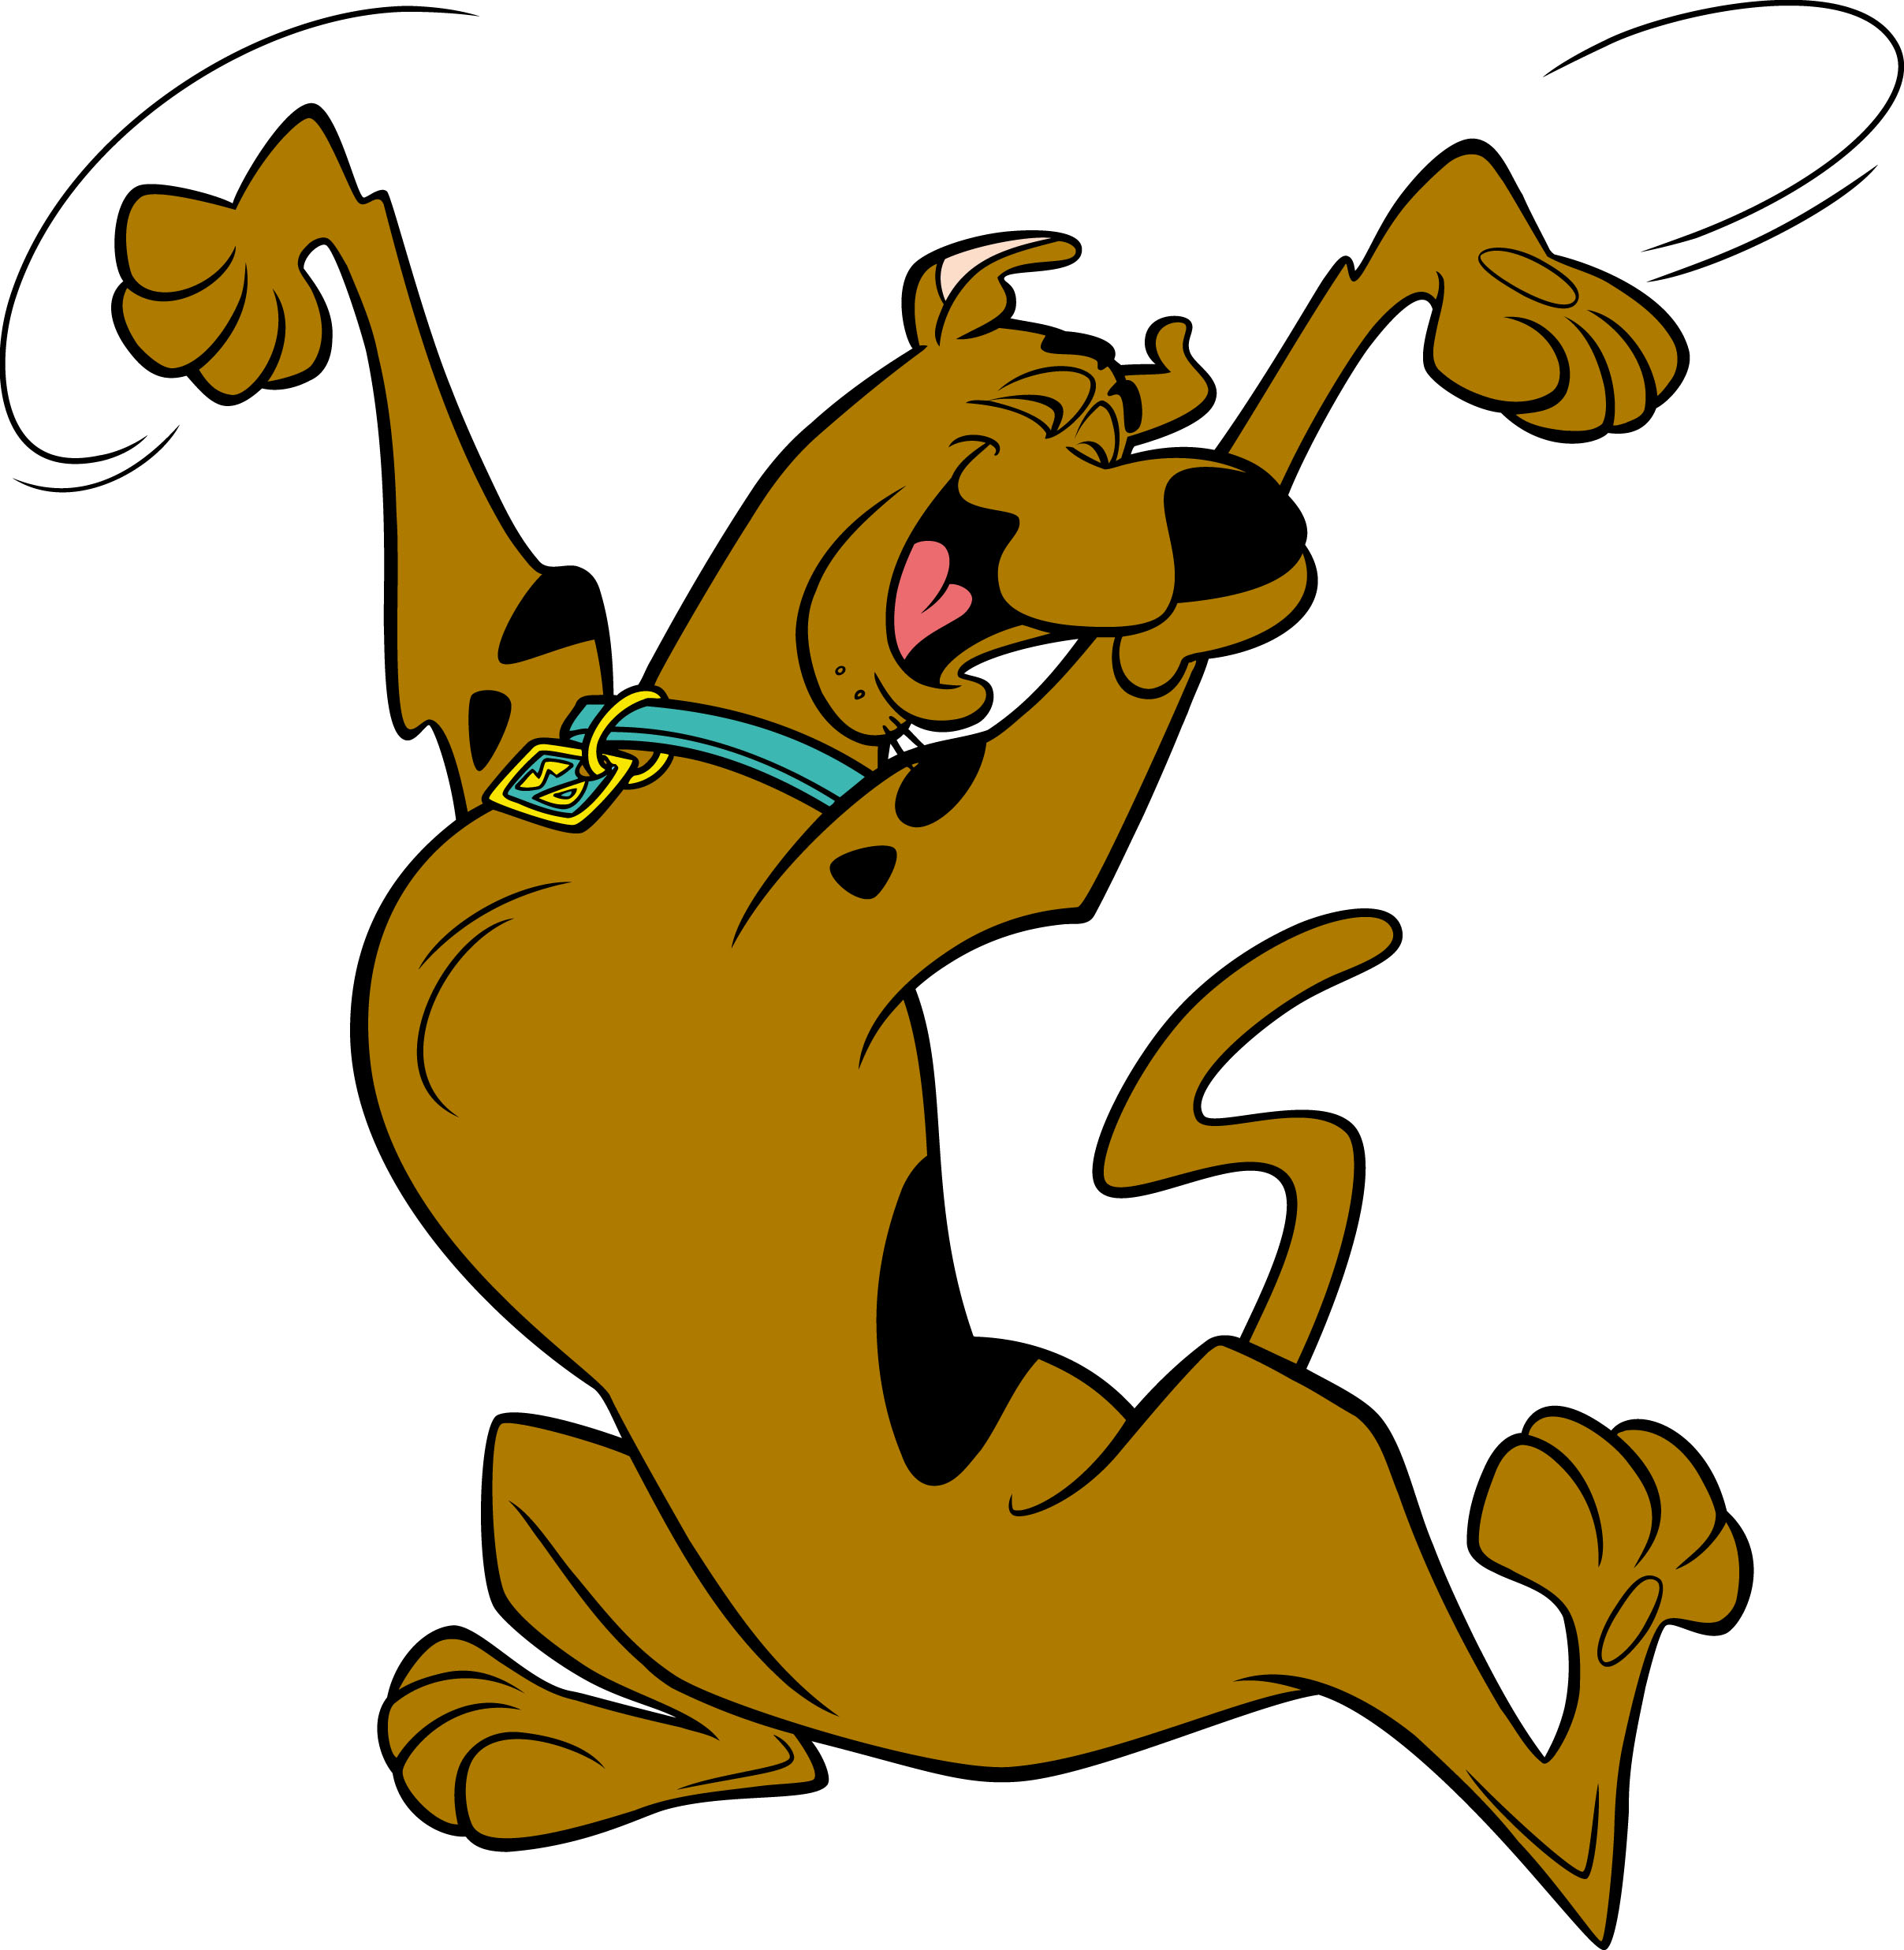 Free Scooby Doo, Download Free Clip Art, Free Clip Art on